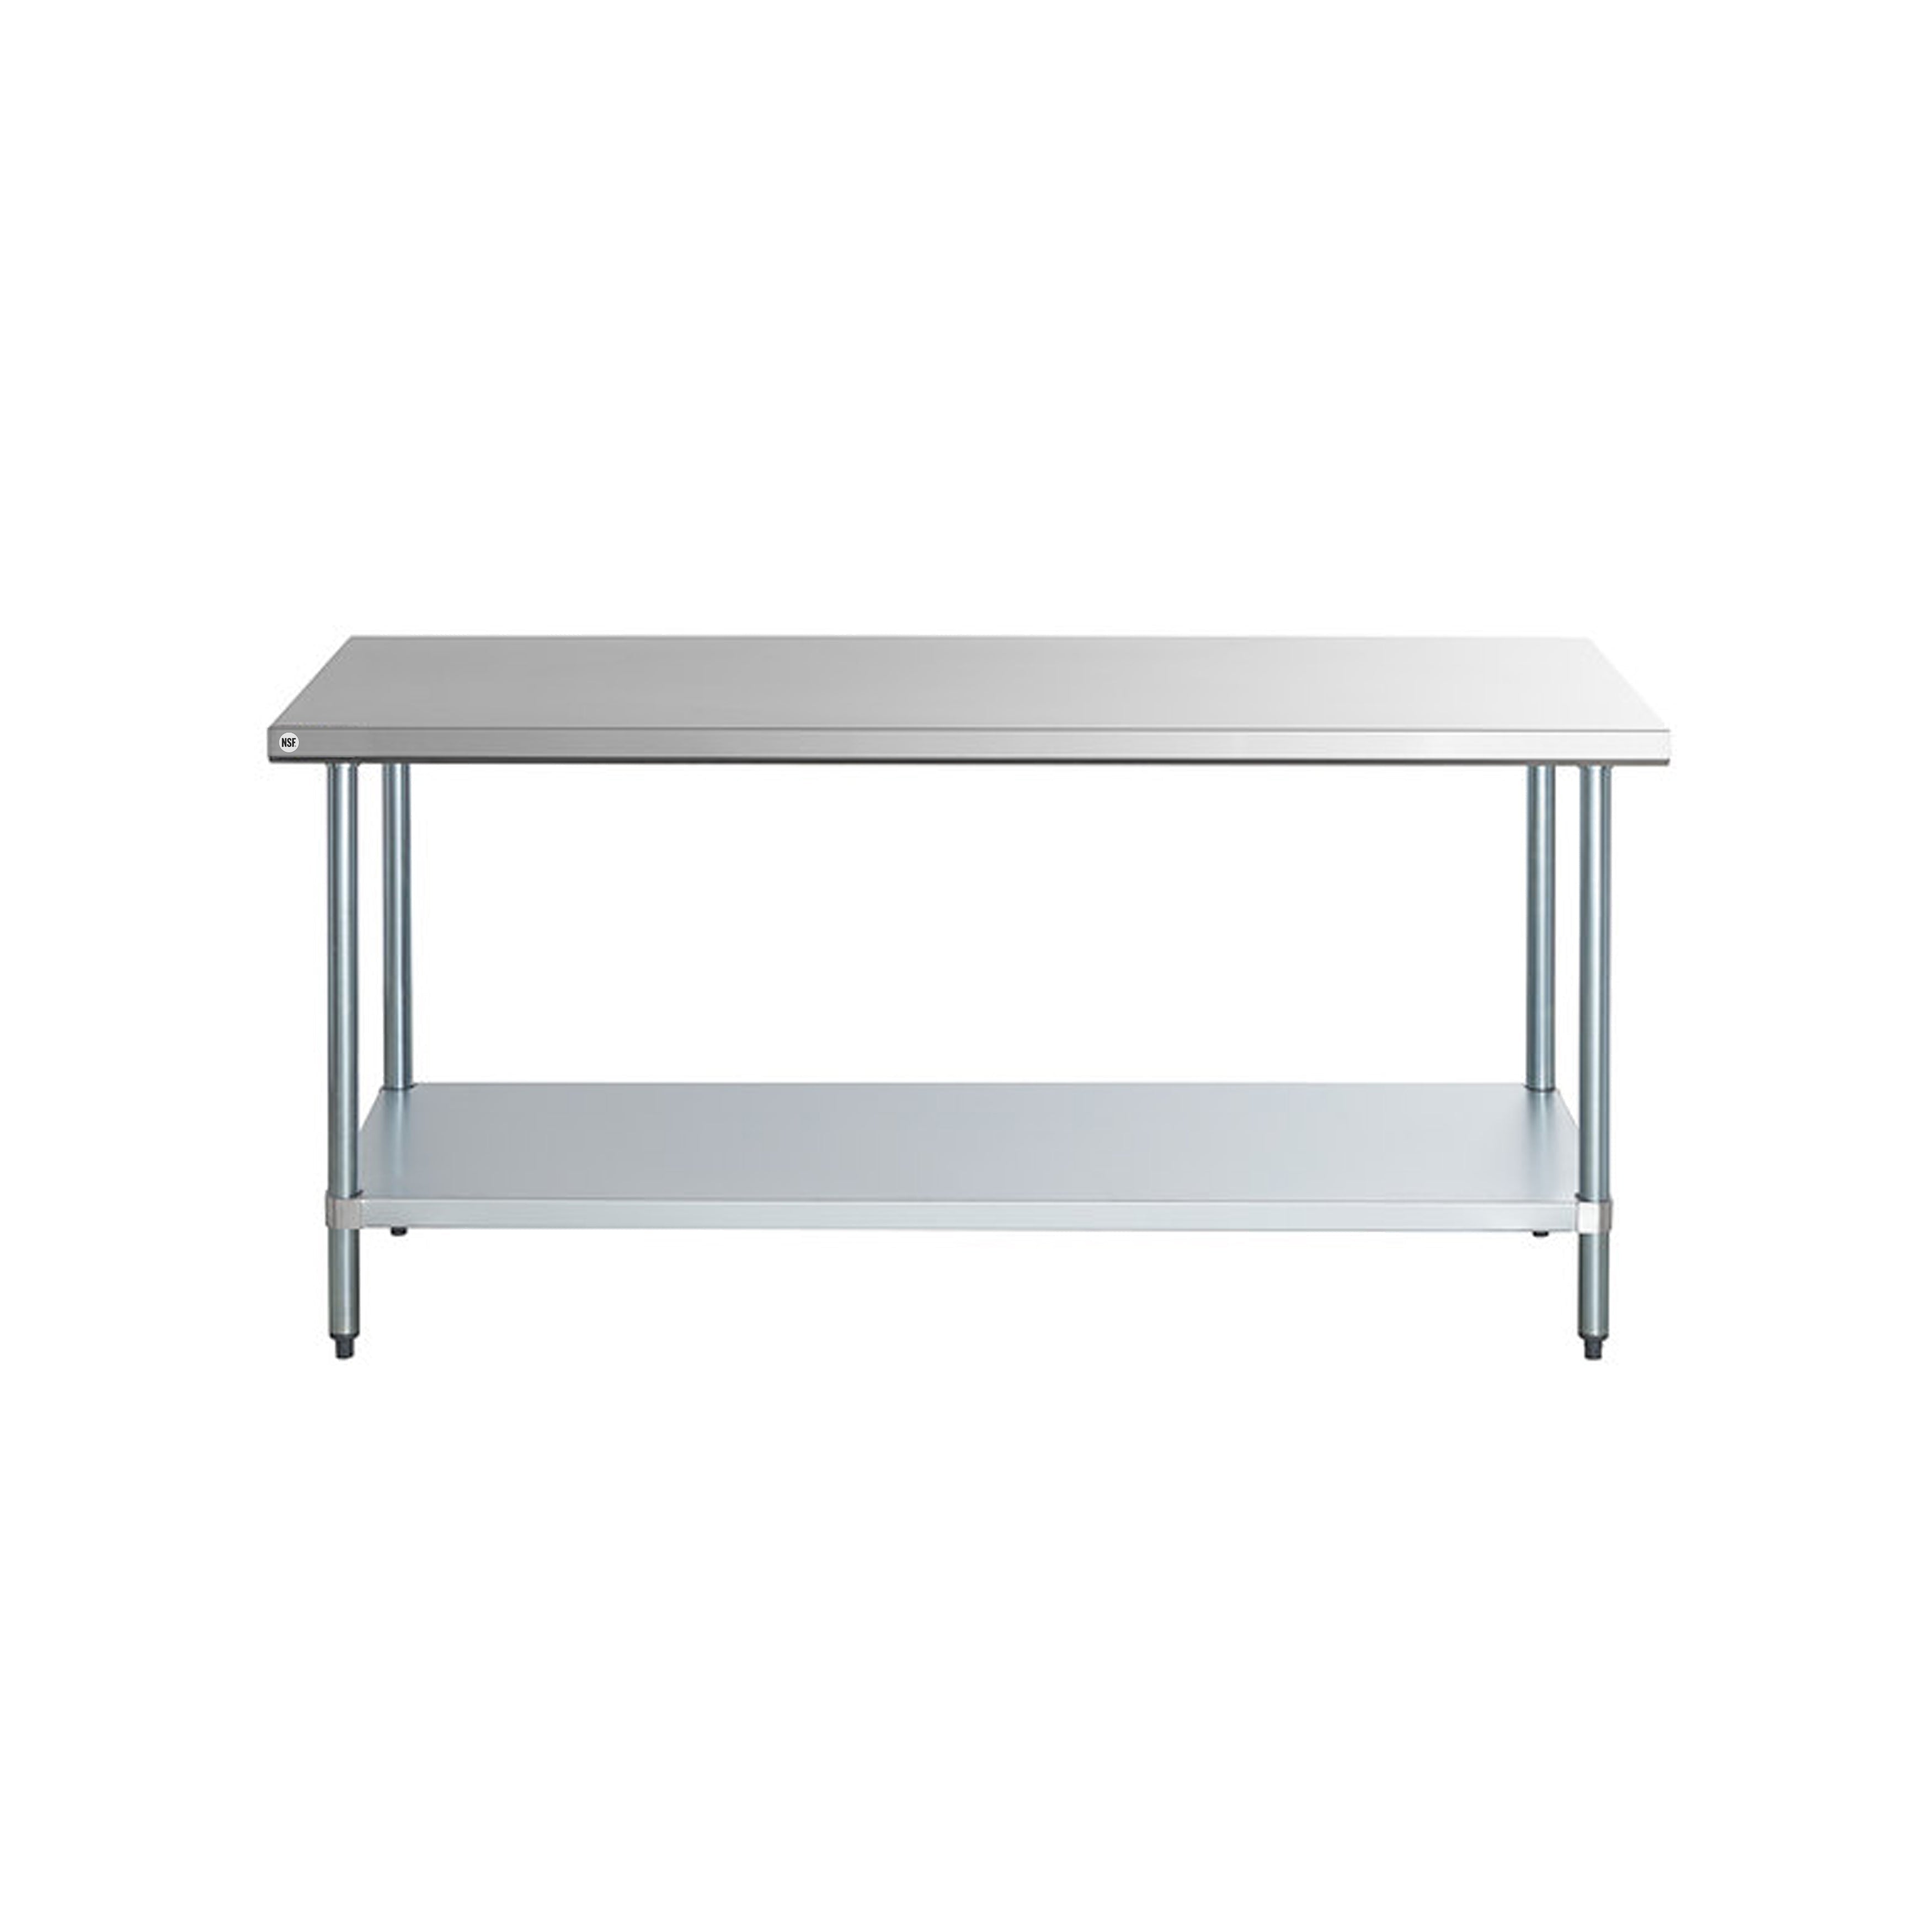 Omcan - 18855, Commercial 96" x 30" Stainless Steel Kitchen Work Table 1700lbs Medium Duty